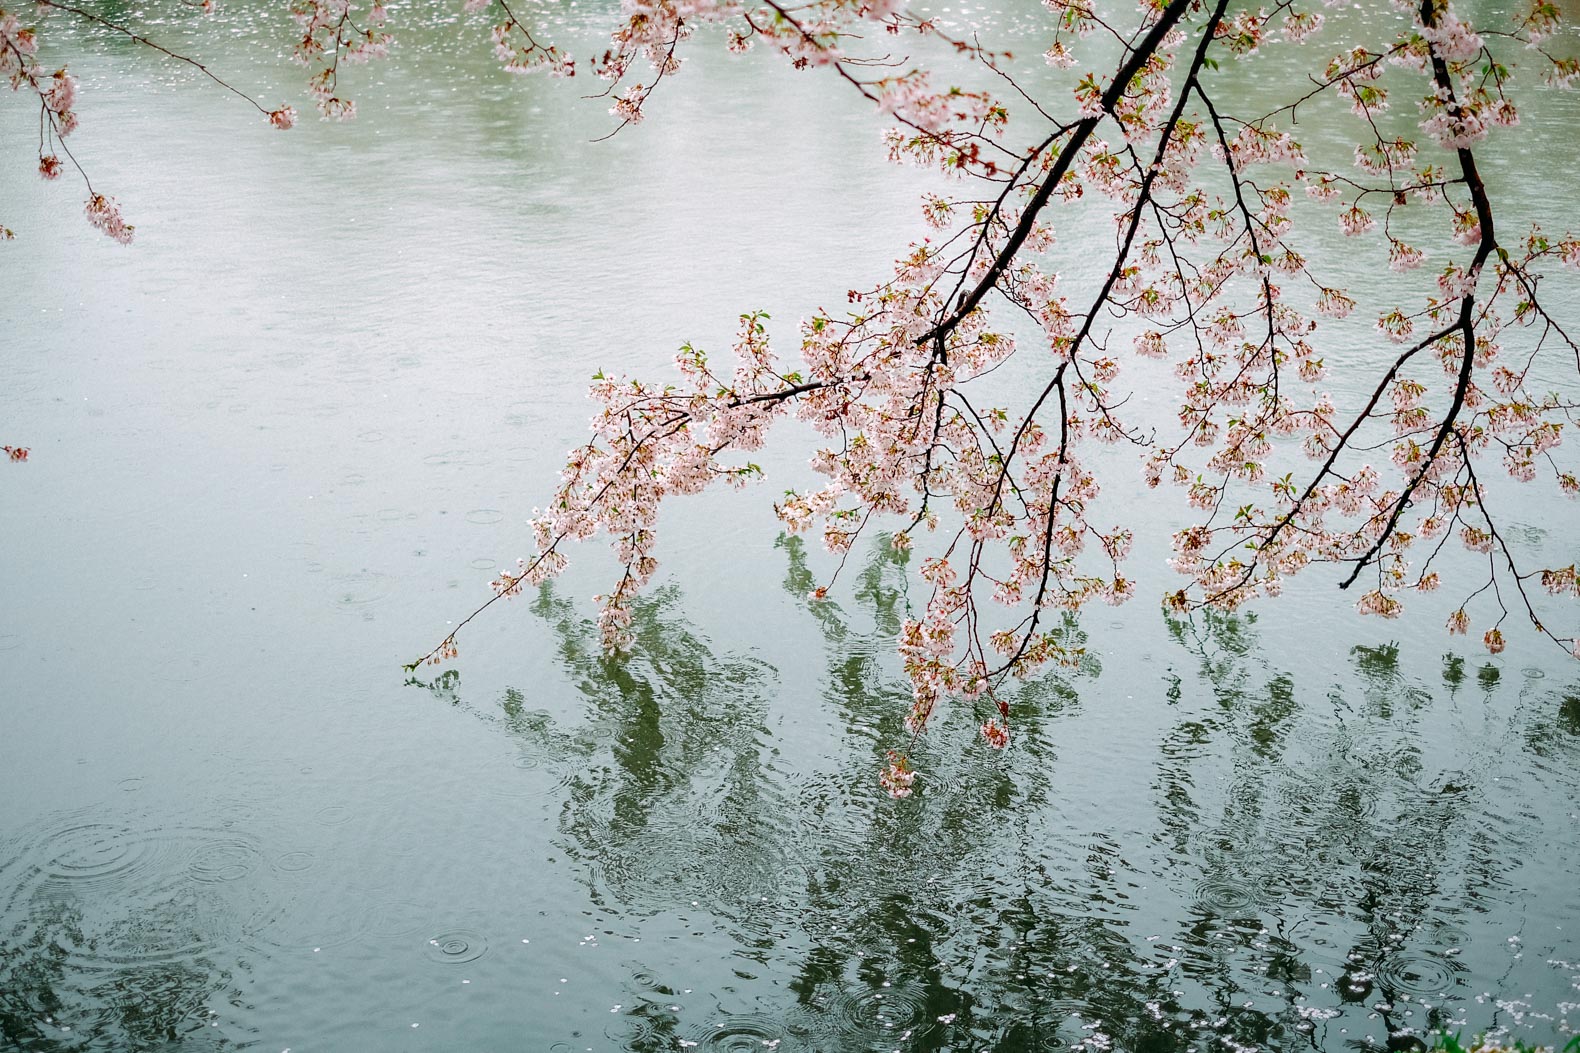 Cherry blossoms reflected in the lake